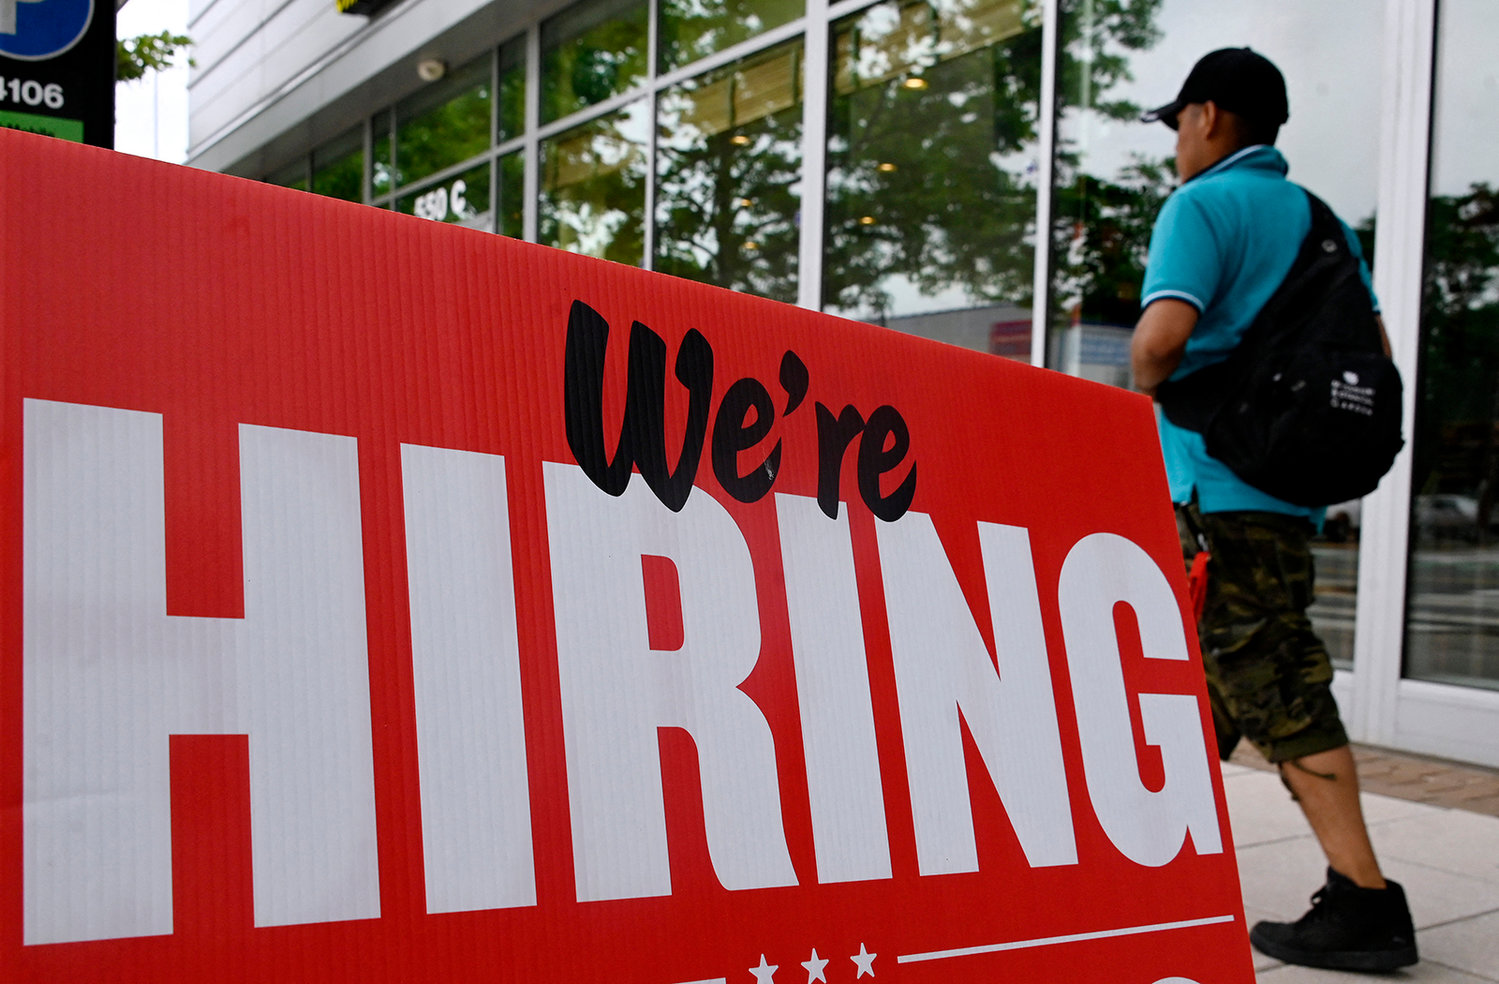 A man walks past a "now hiring" sign posted outside of a restaurant in Arlington, Virginia on June 3, 2022. (Olivier Douliery/AFP via Getty Images/TNS)